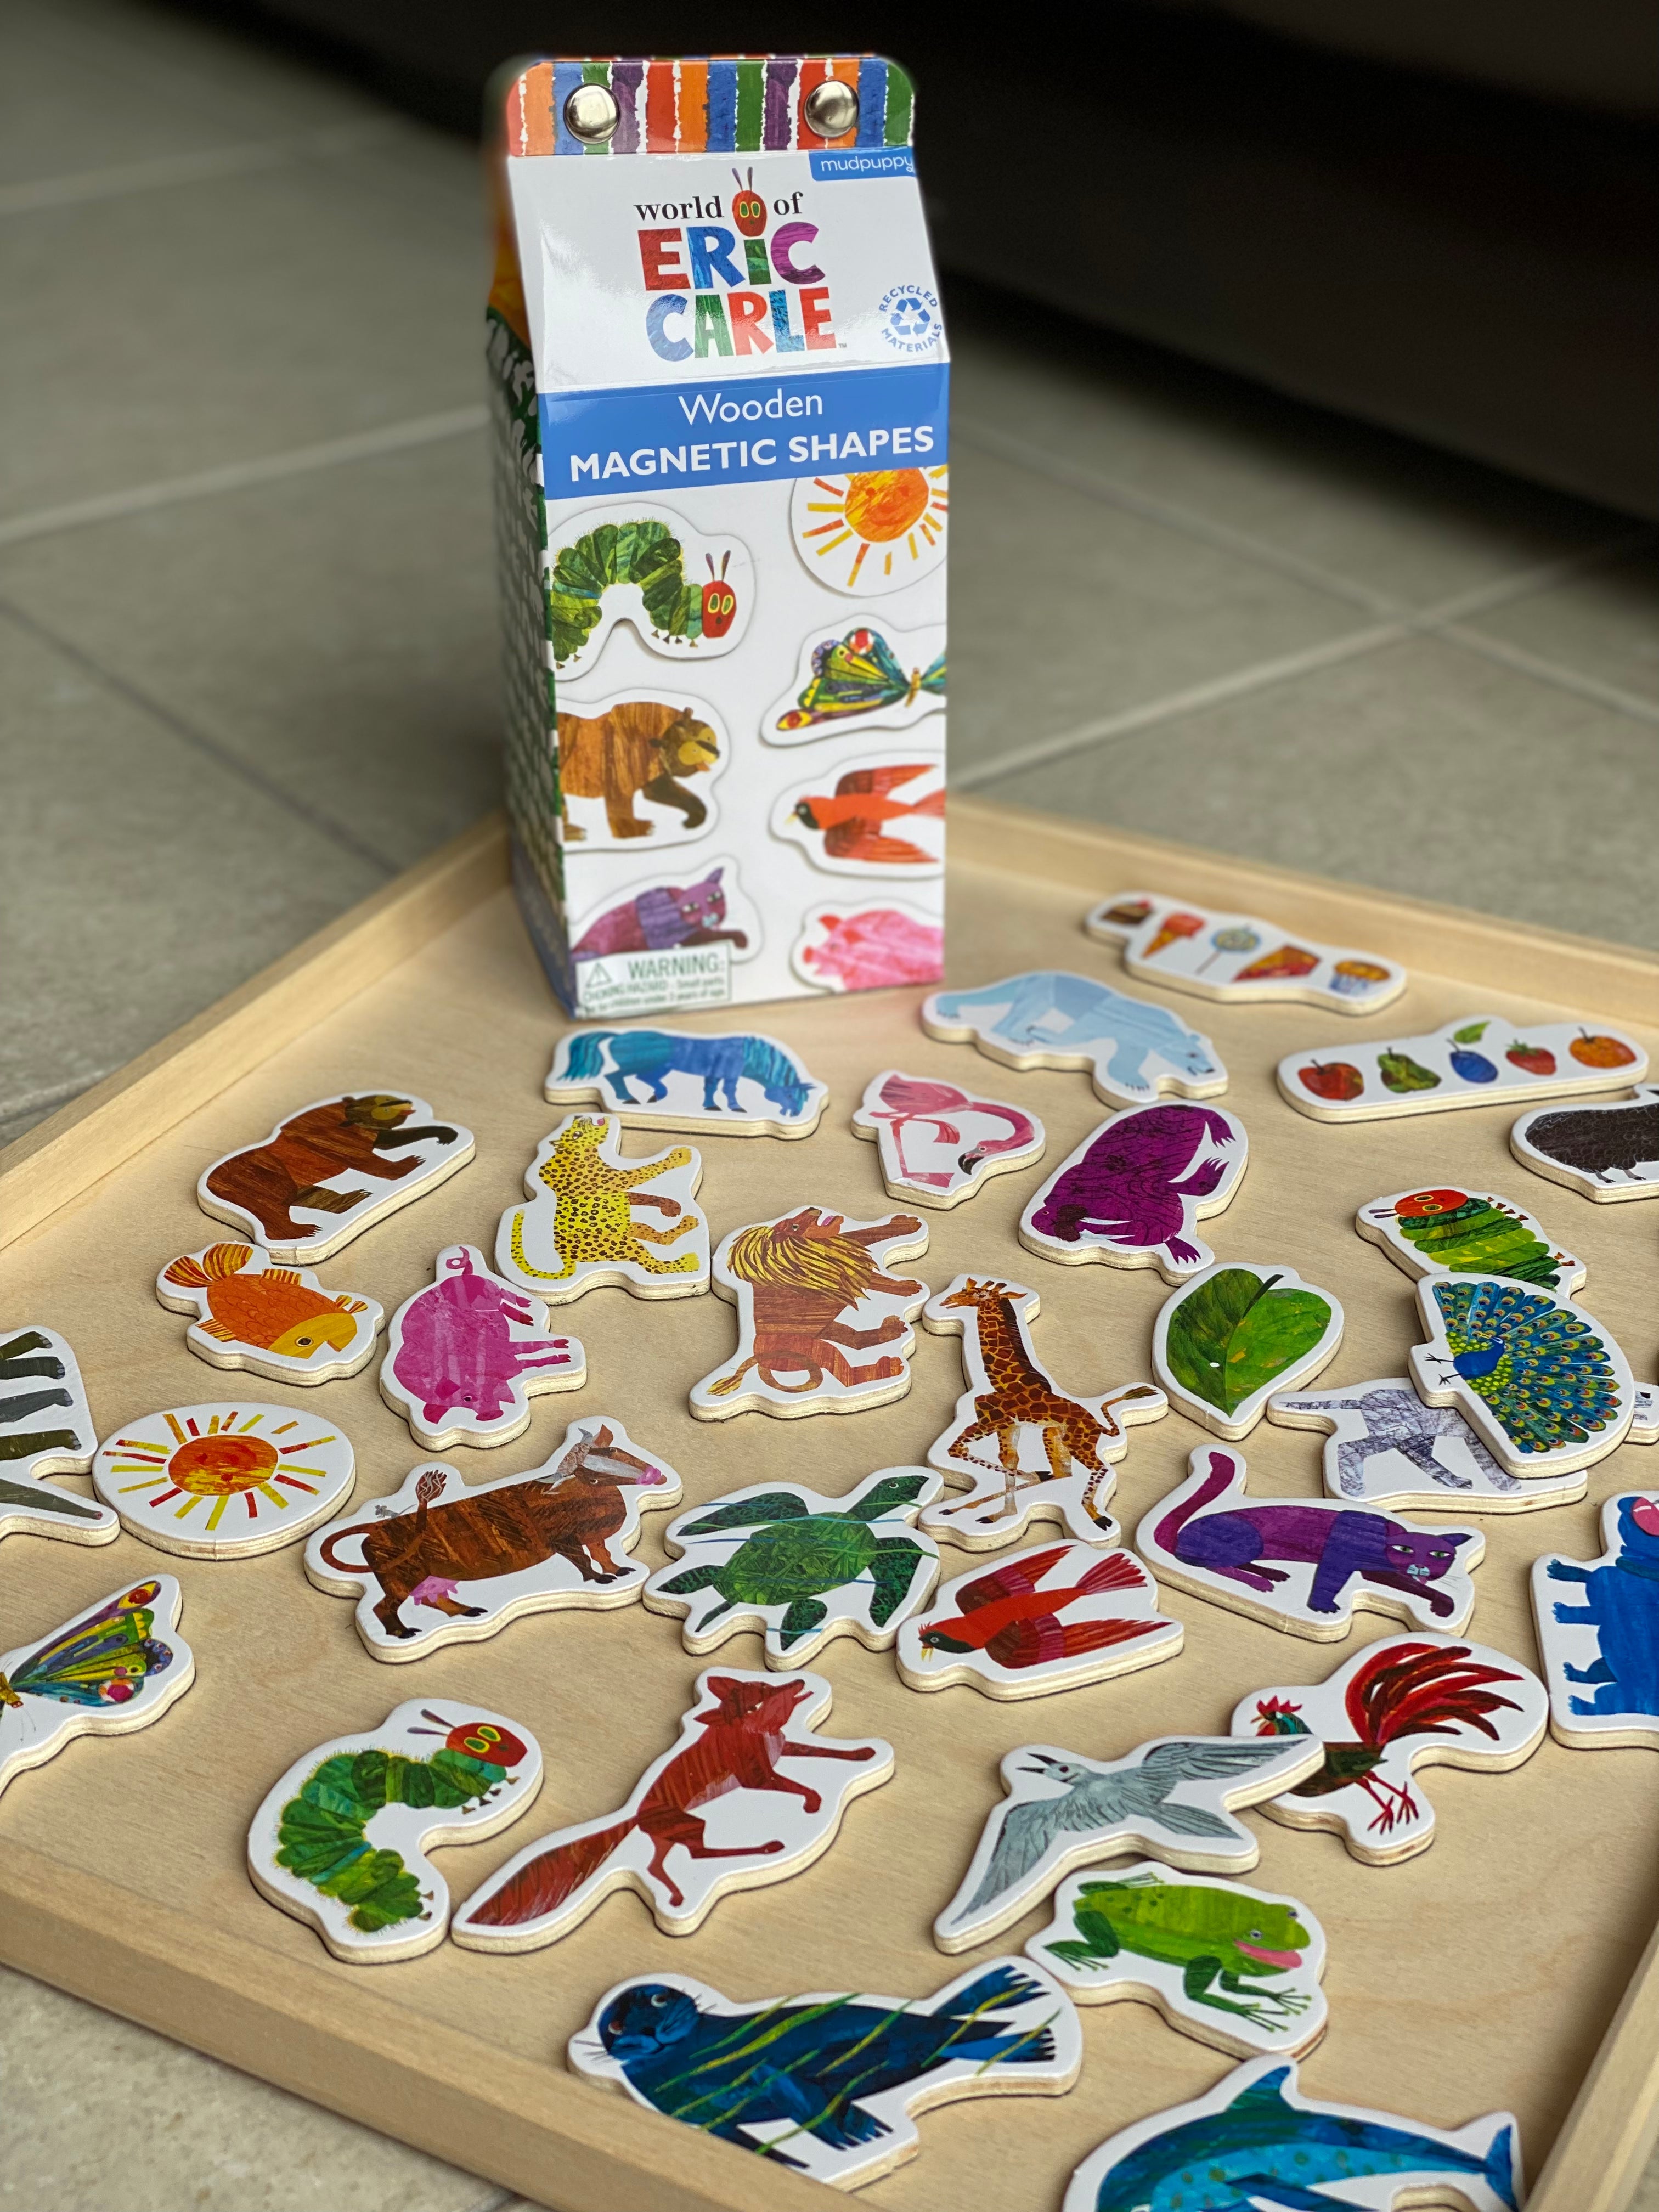 The World of Eric Carle: Wooden Magnetic Shapes